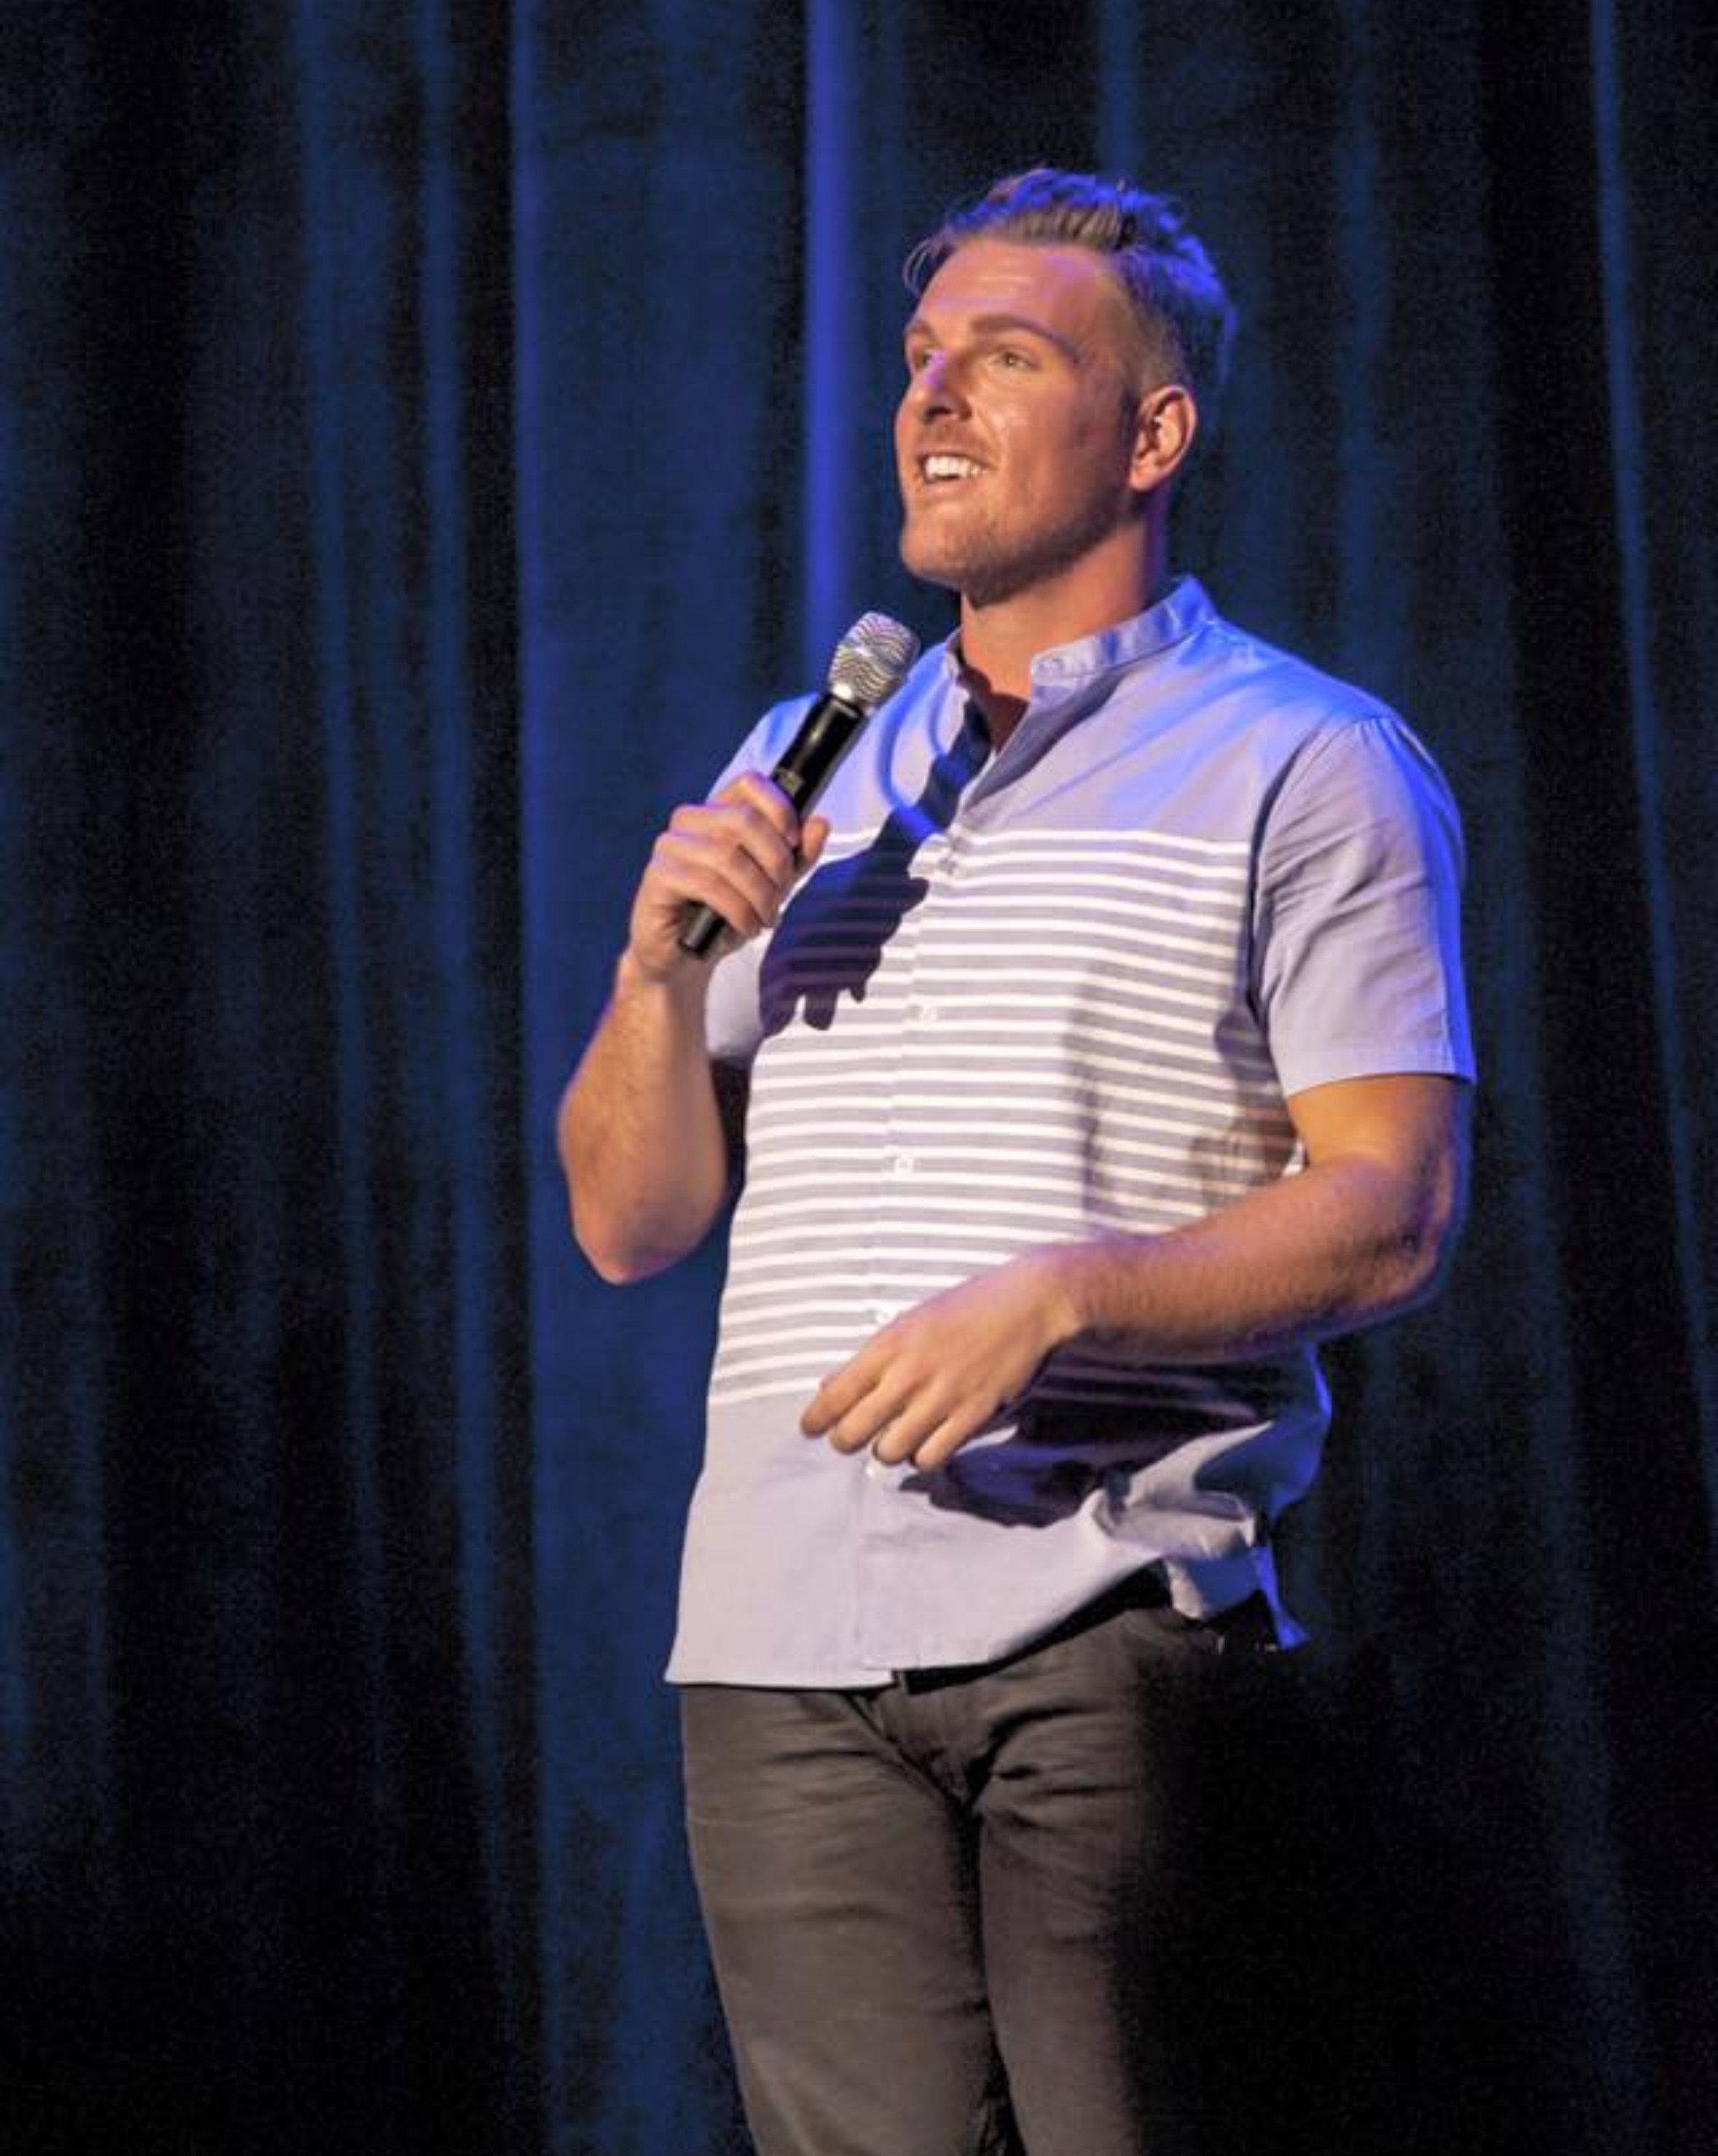 Pat McAfee did eight years in the NFL before becoming a sports host and commentator. Photo: Pat McAfee Show/Facebook 